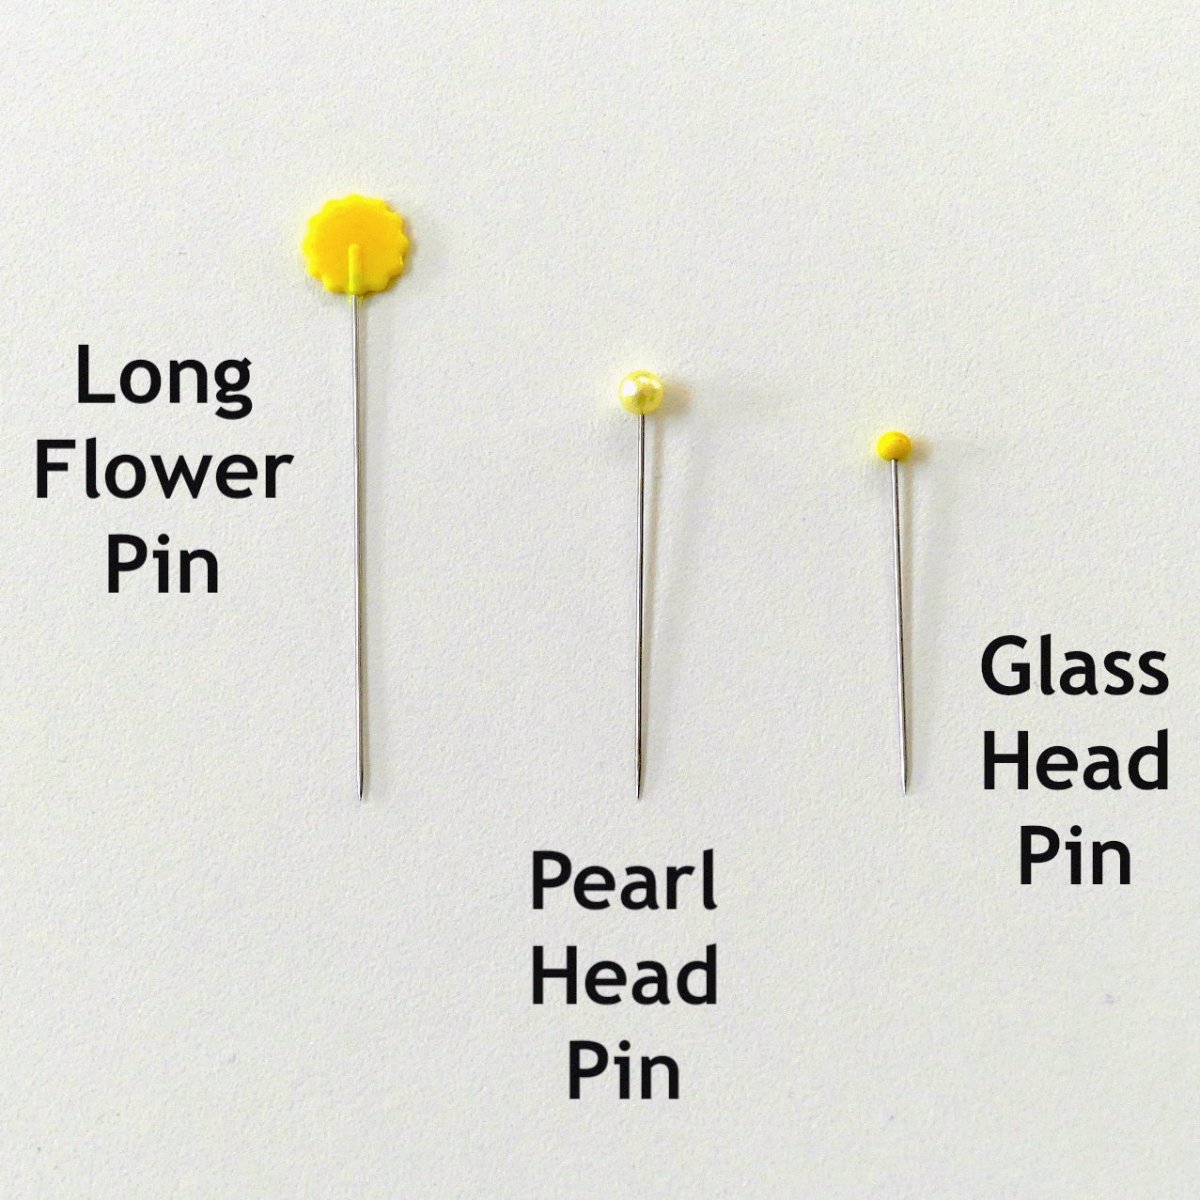 A picture showing the Long Flower Pin's size in relation to other pins.